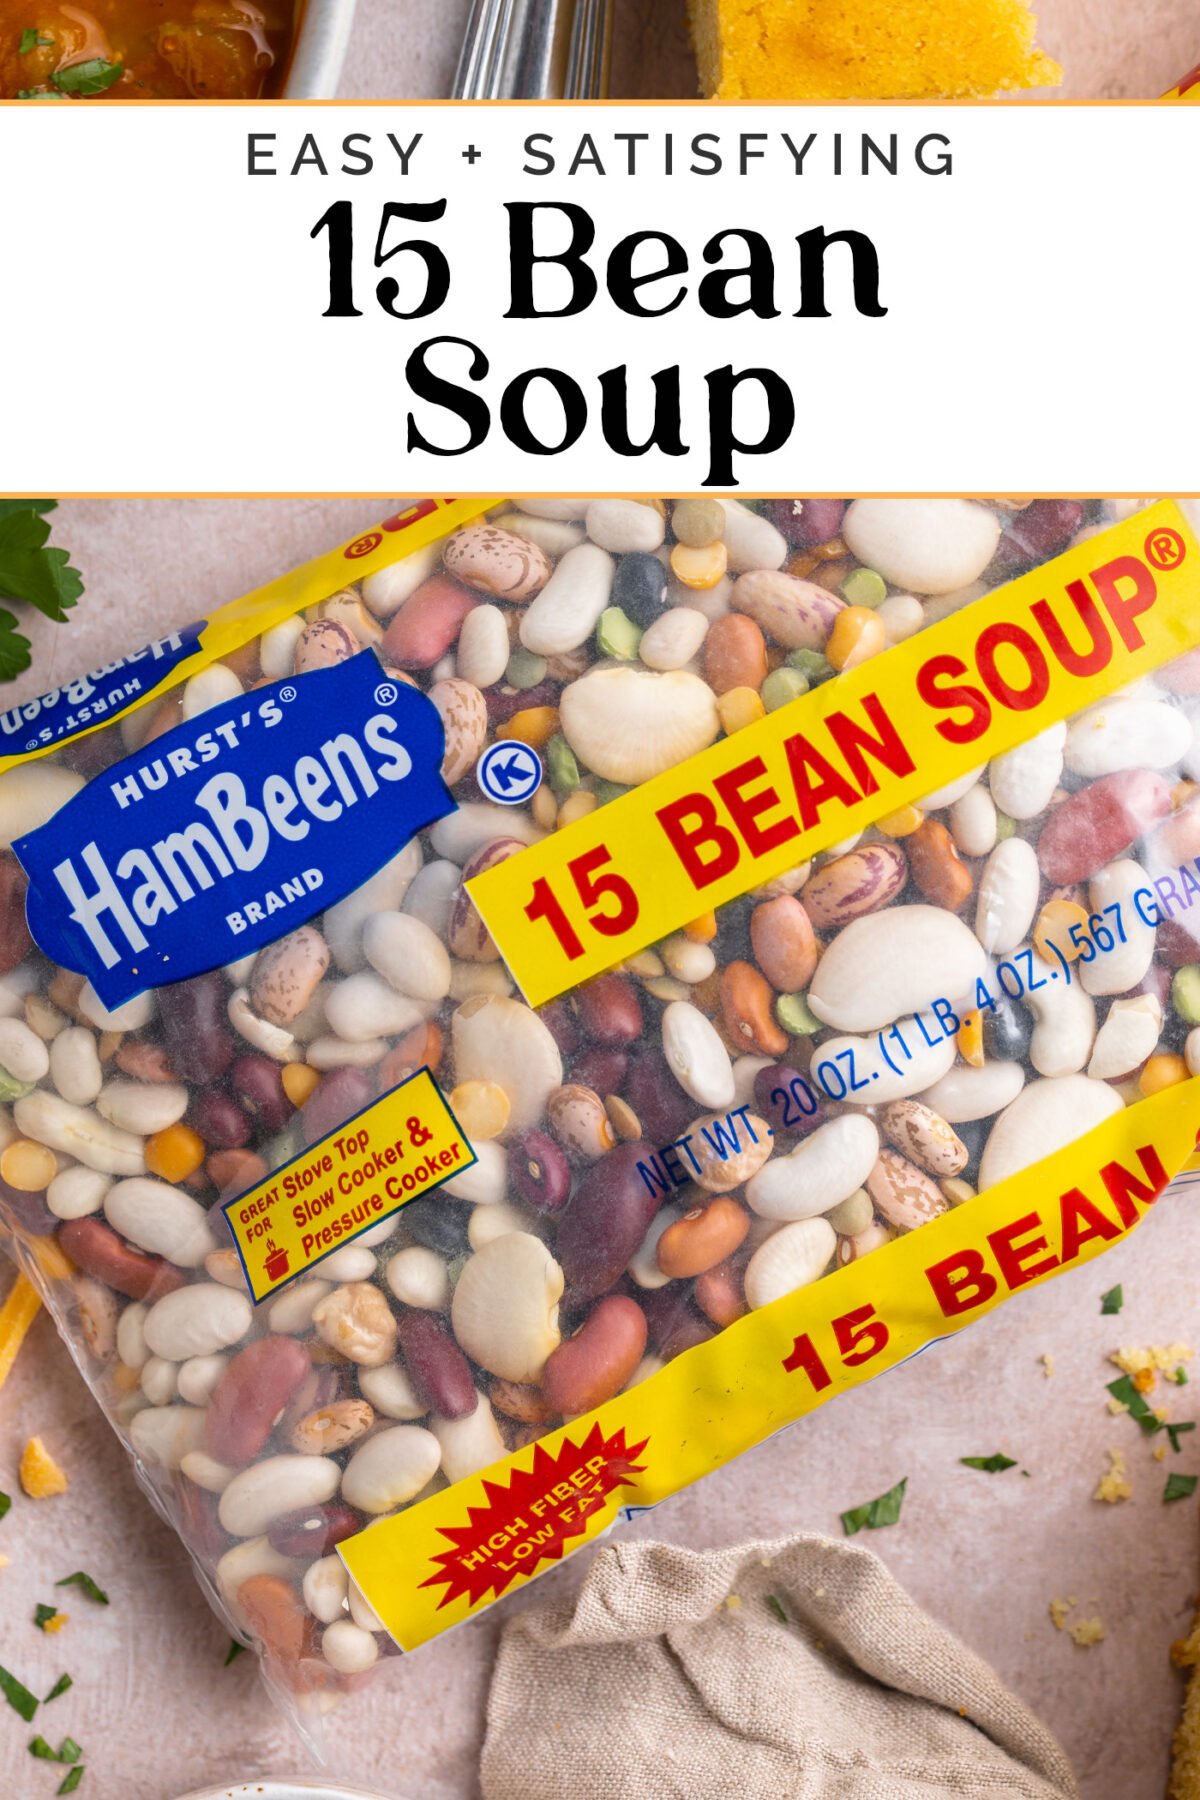 Pin graphic for 15 Bean Soup.